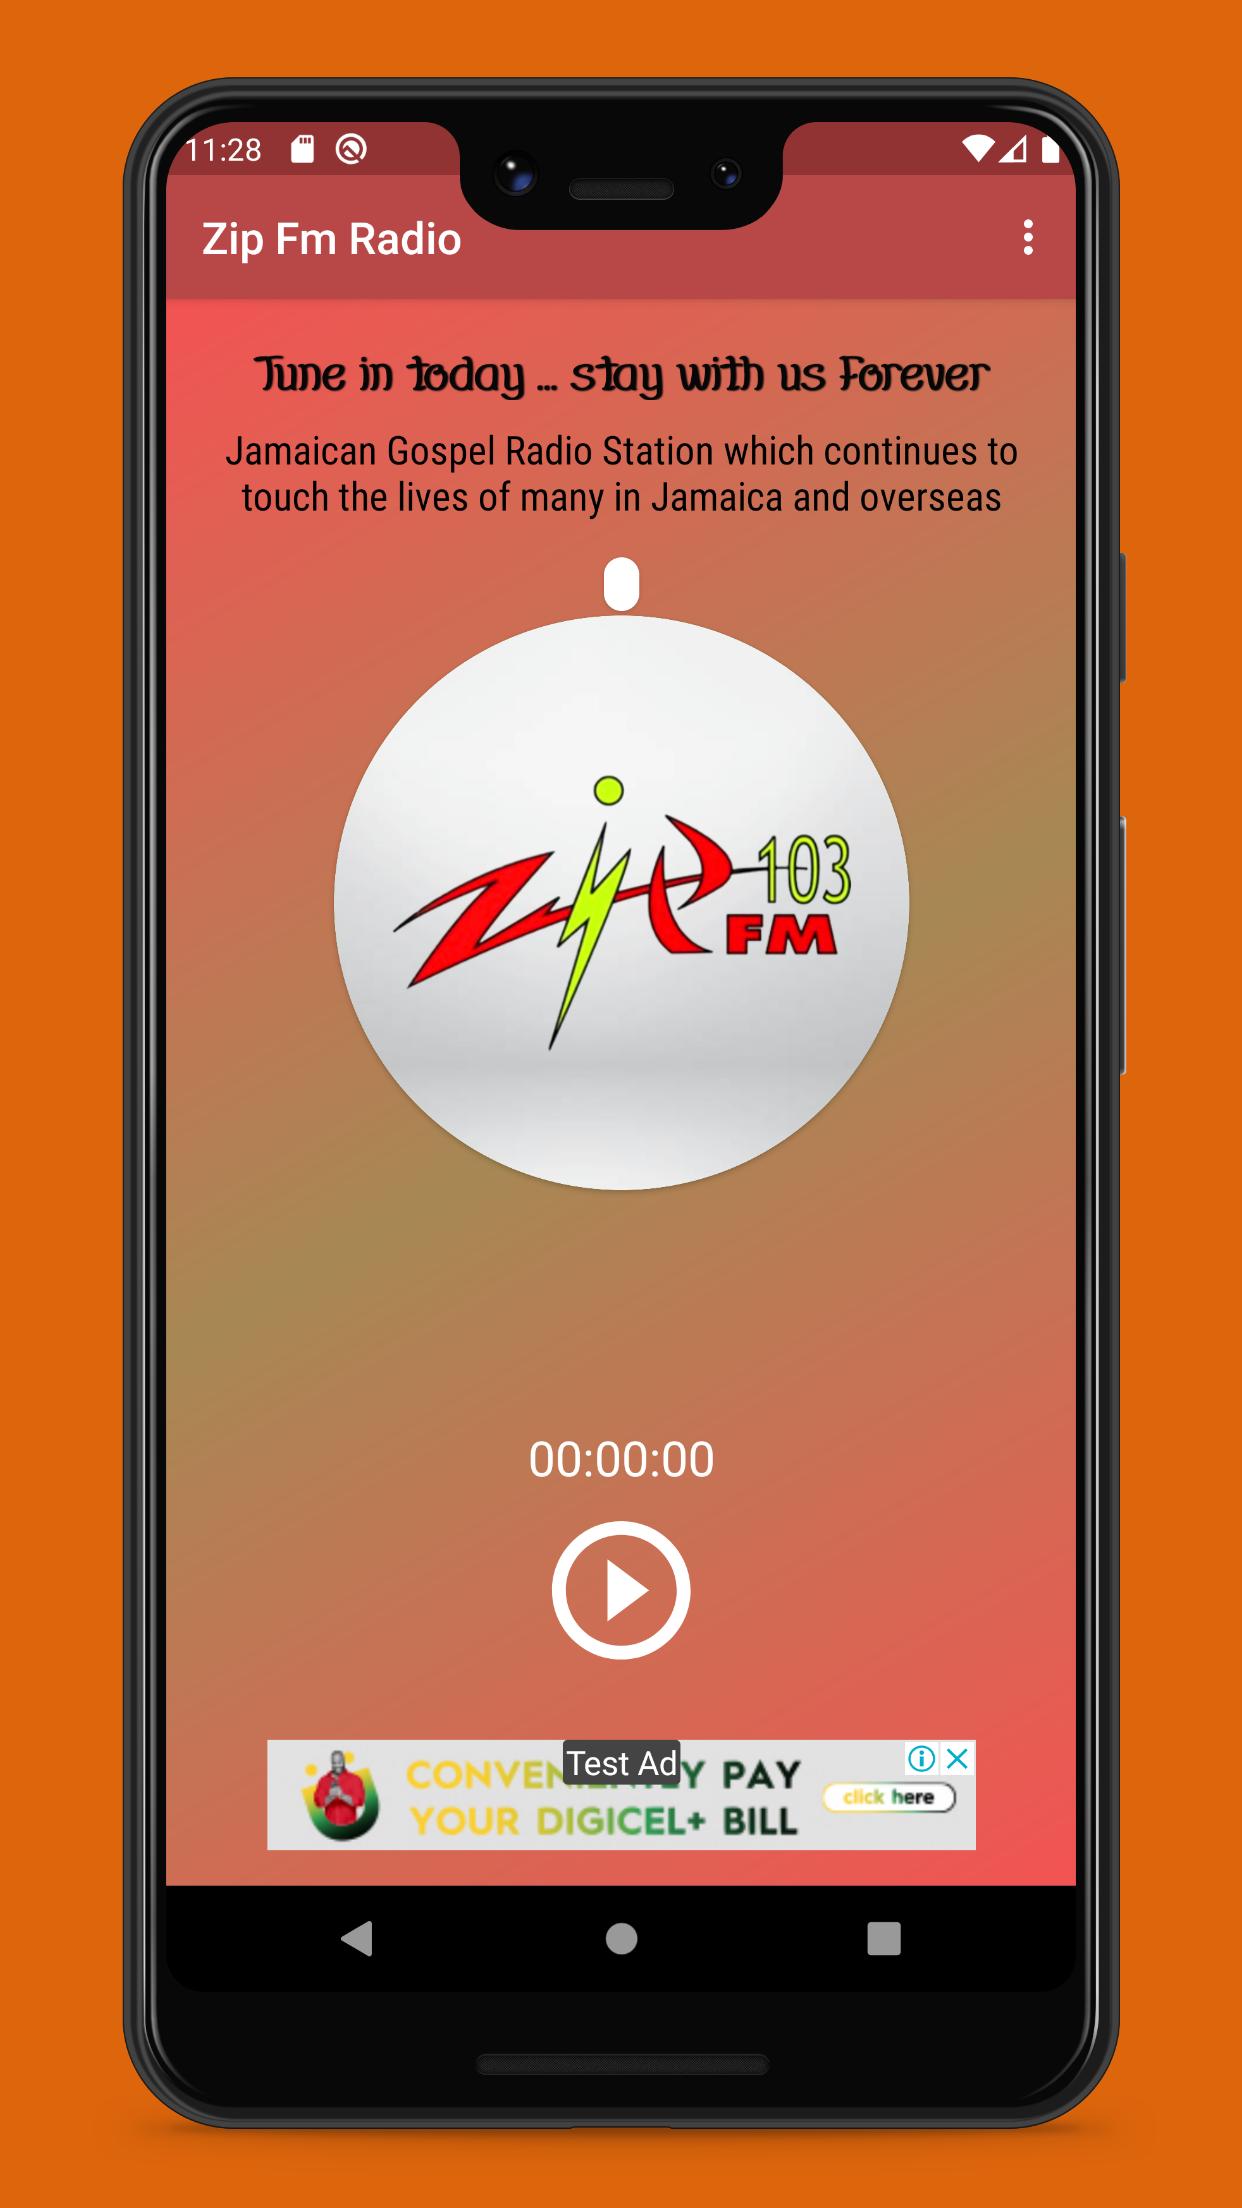 Zip 103 Fm: Live Radio for Android - APK Download